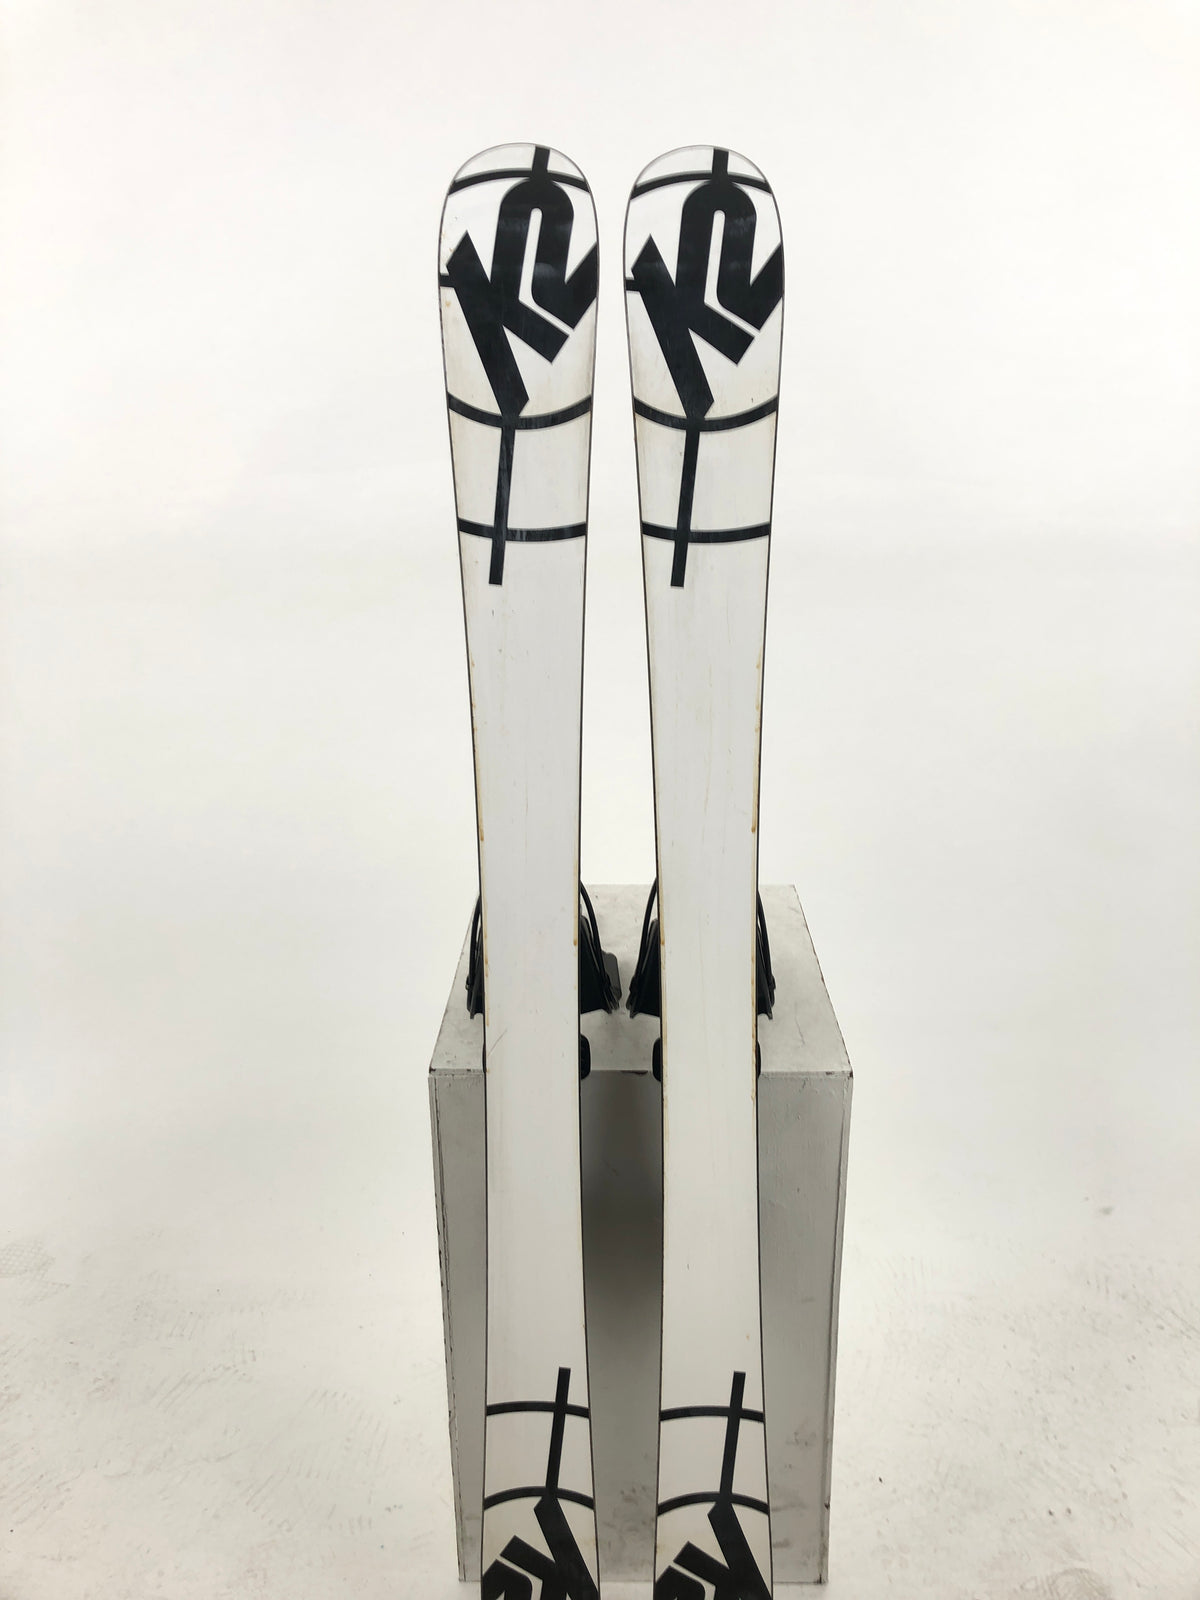 116cm K2 Kids Twin Tips W/ Rottefella Cable Bindings (Used)